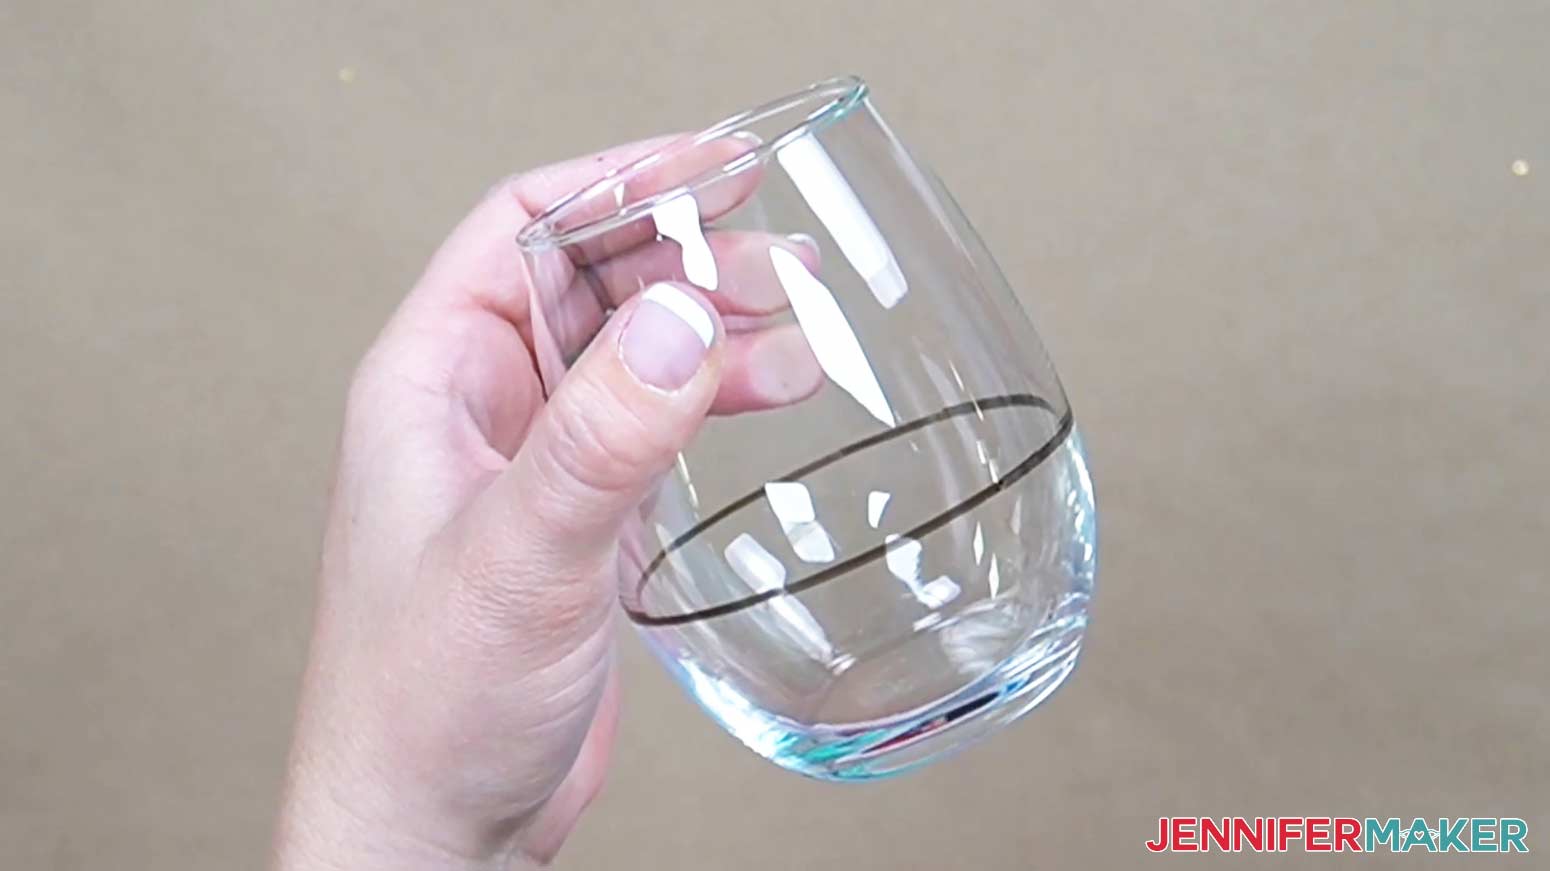 Make a guideline around the entire glass to mark the place where the glitter will stop on the glass.